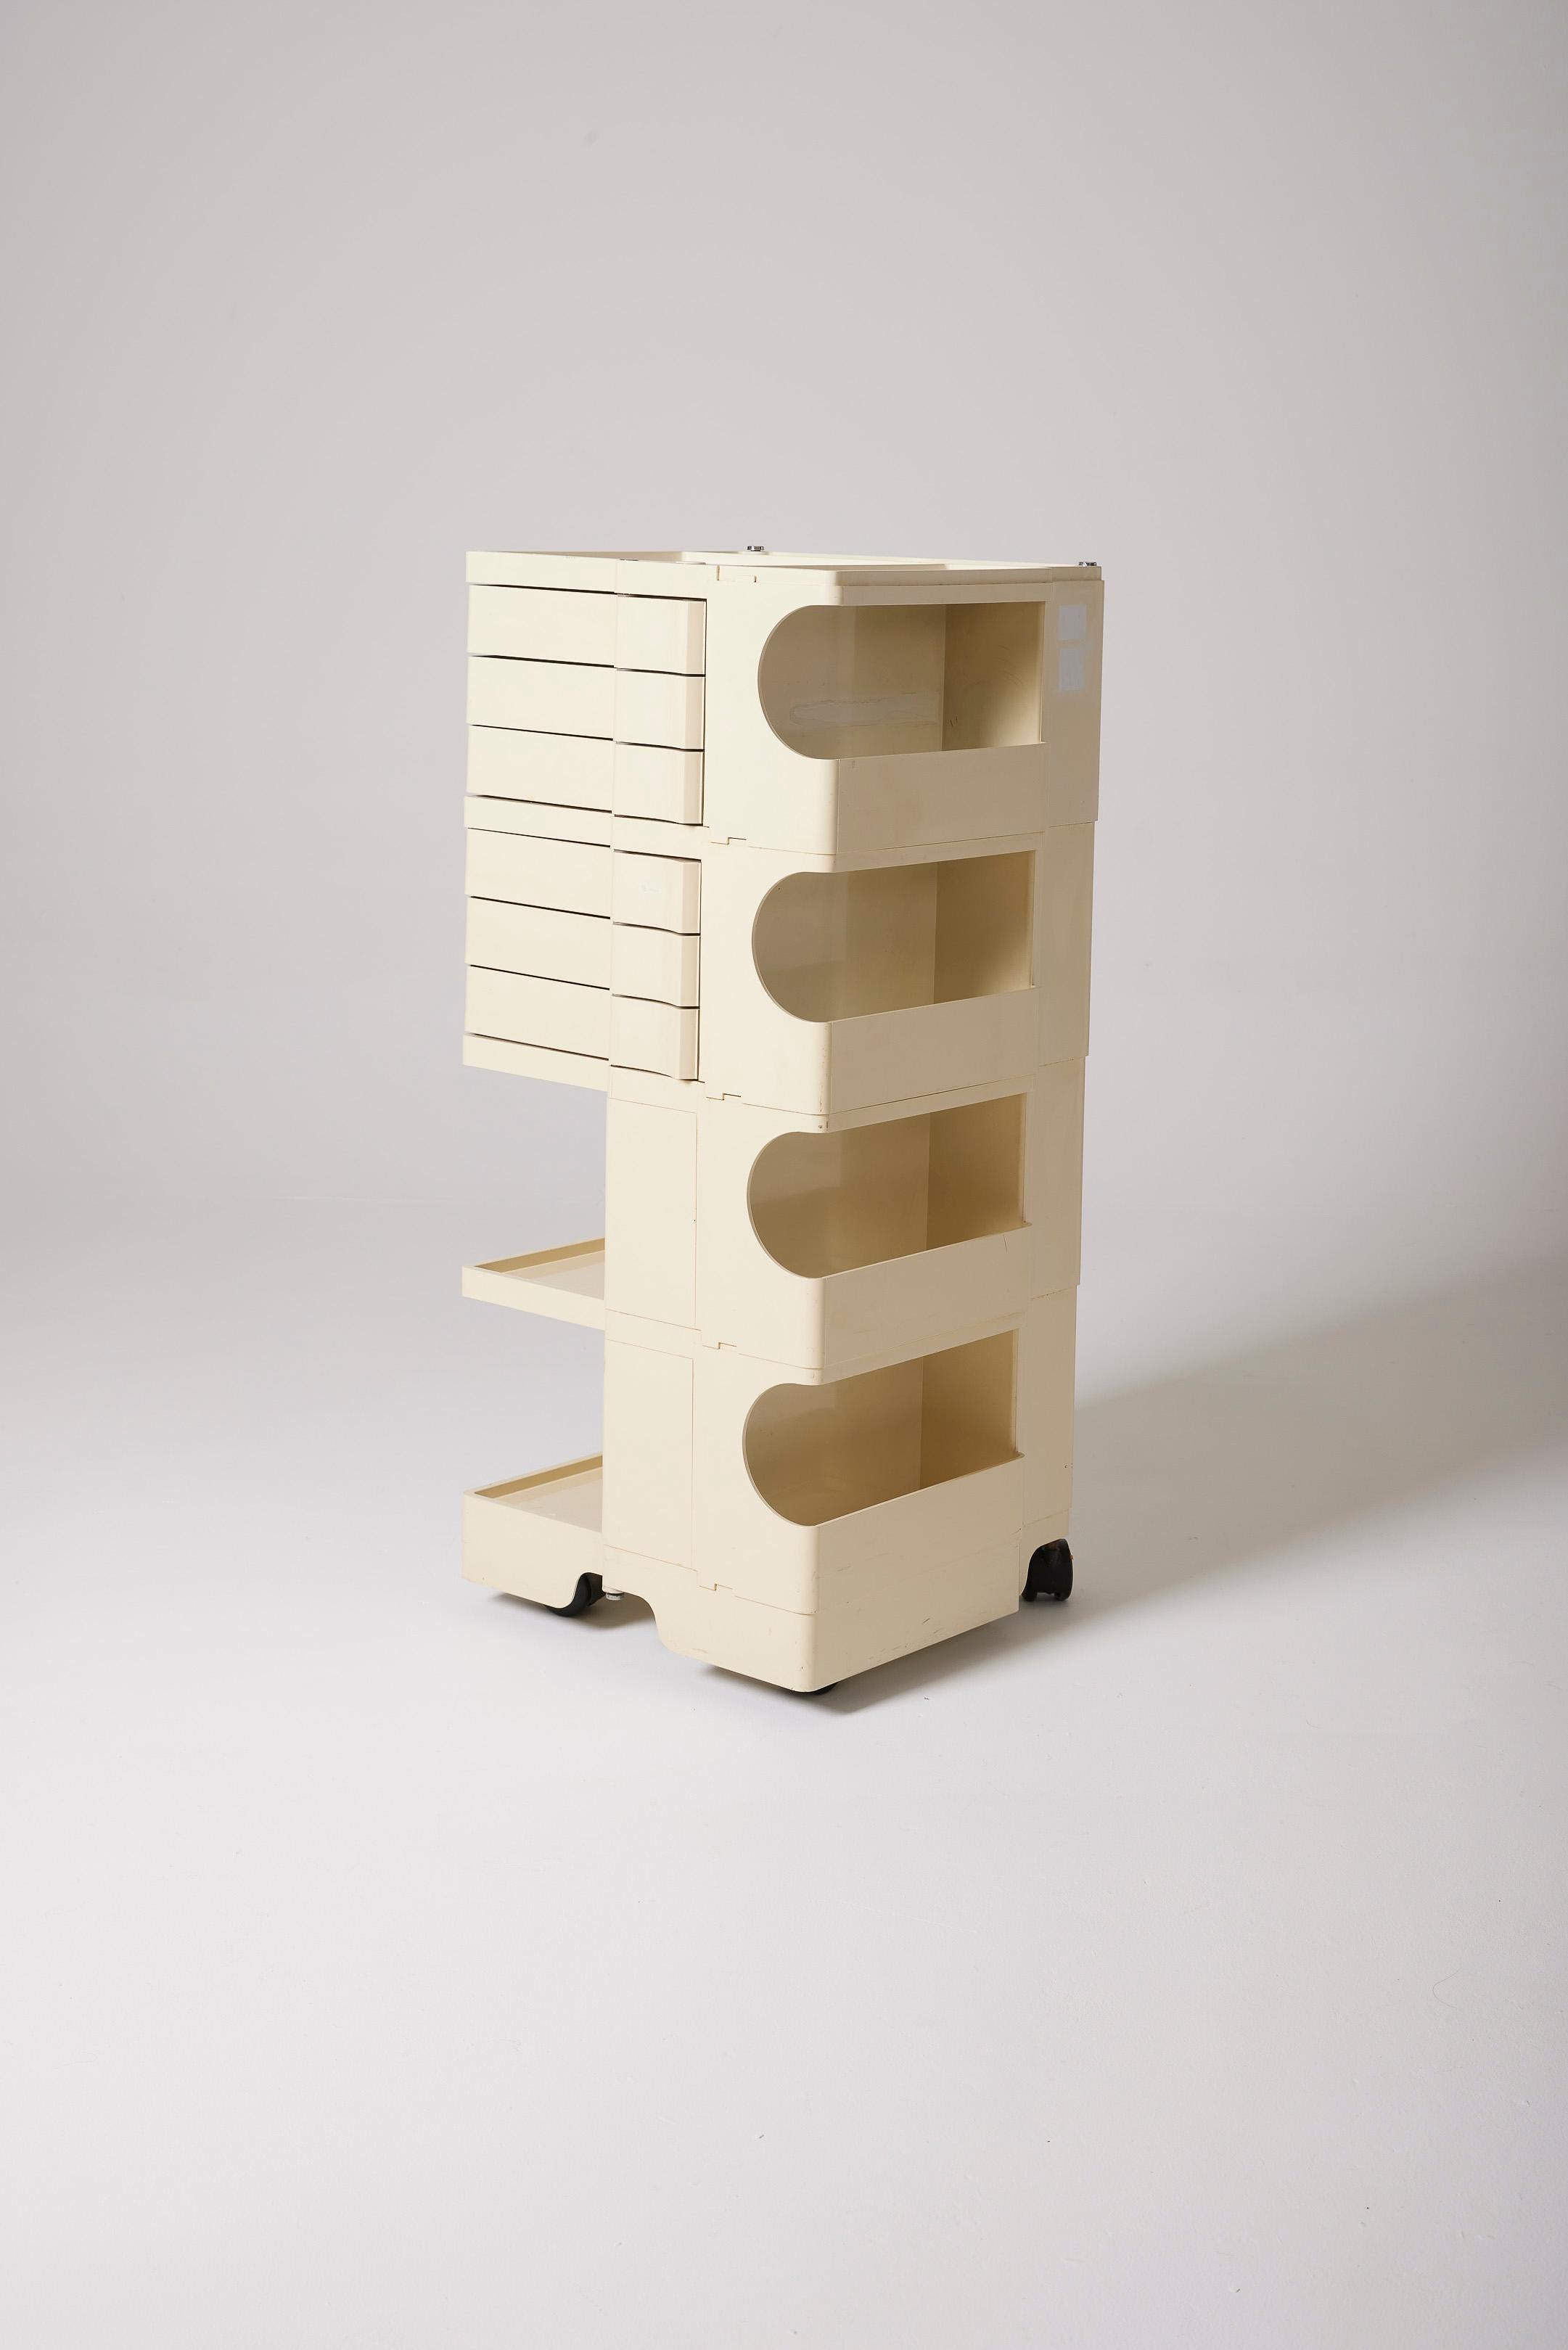 White Boby cart by Italian designer Joe Colombo, from the 1970s. Made of molded ABS resin, this cart is infinitely modular. It consists of several removable drawers and is mounted on wheels. It is signed in the mass. Some slight signs of wear to